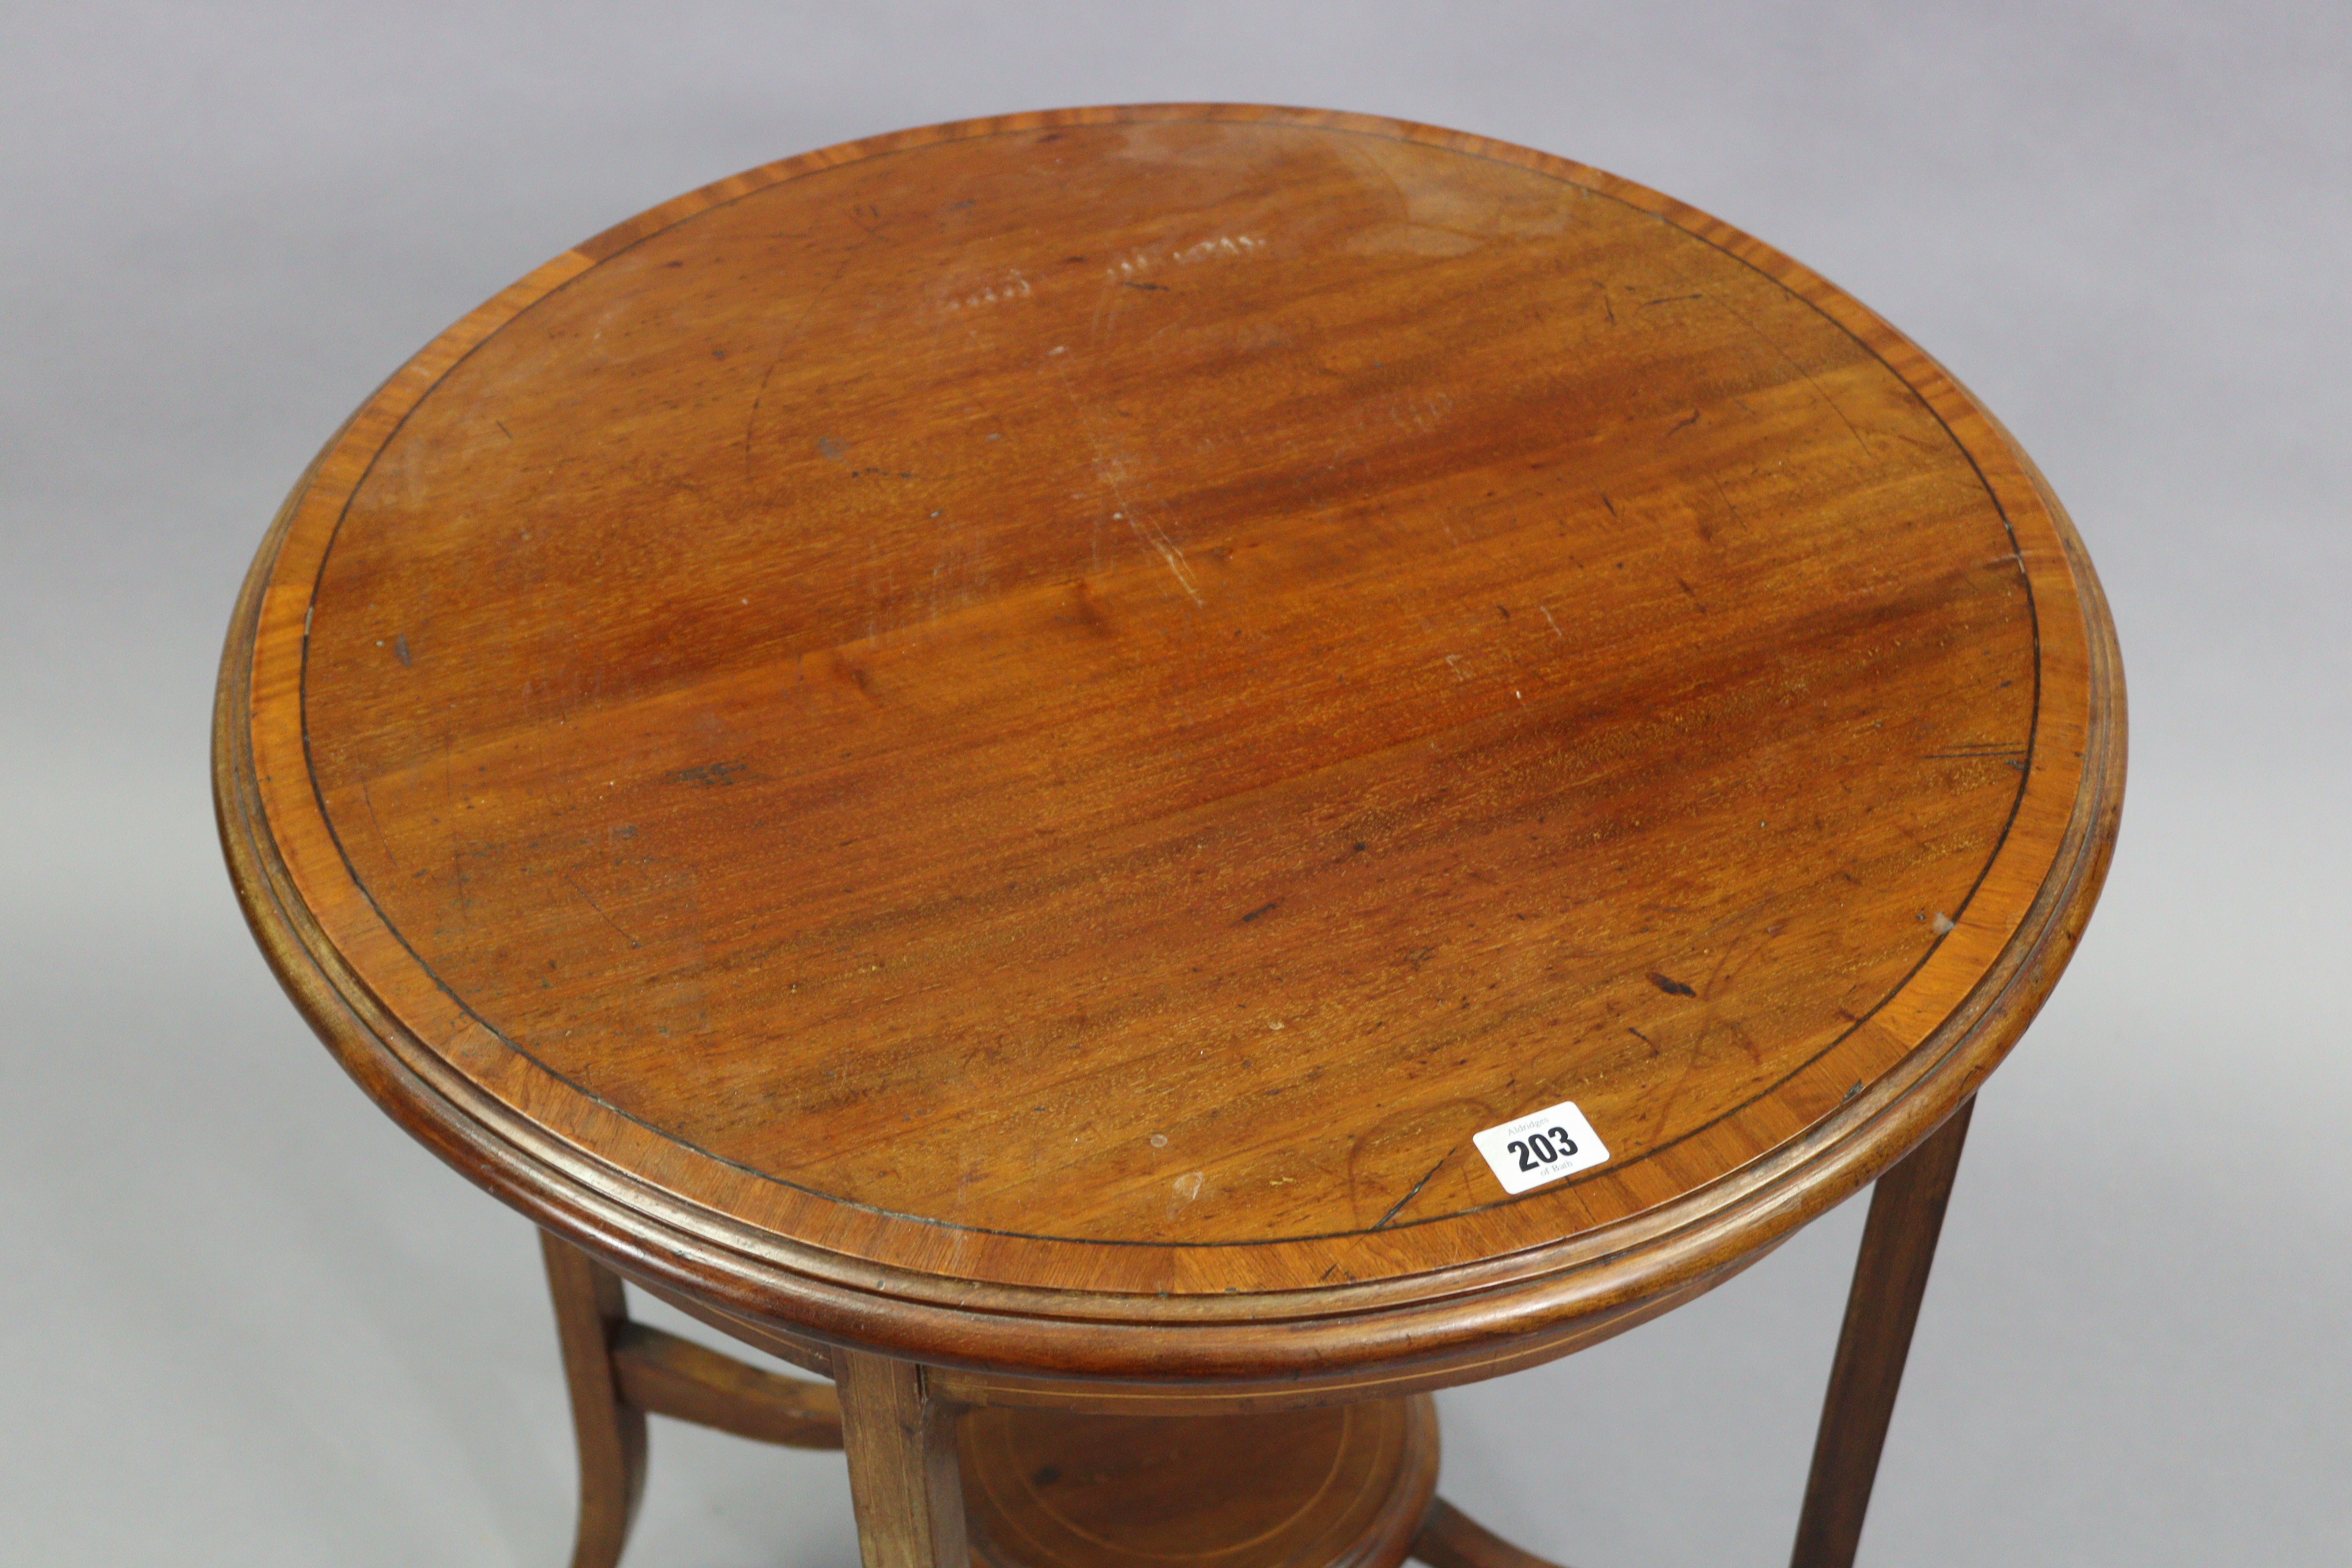 An Edwardian inlaid-mahogany circular two-tier occasional table on four shaped legs, 24” diameter - Image 2 of 2